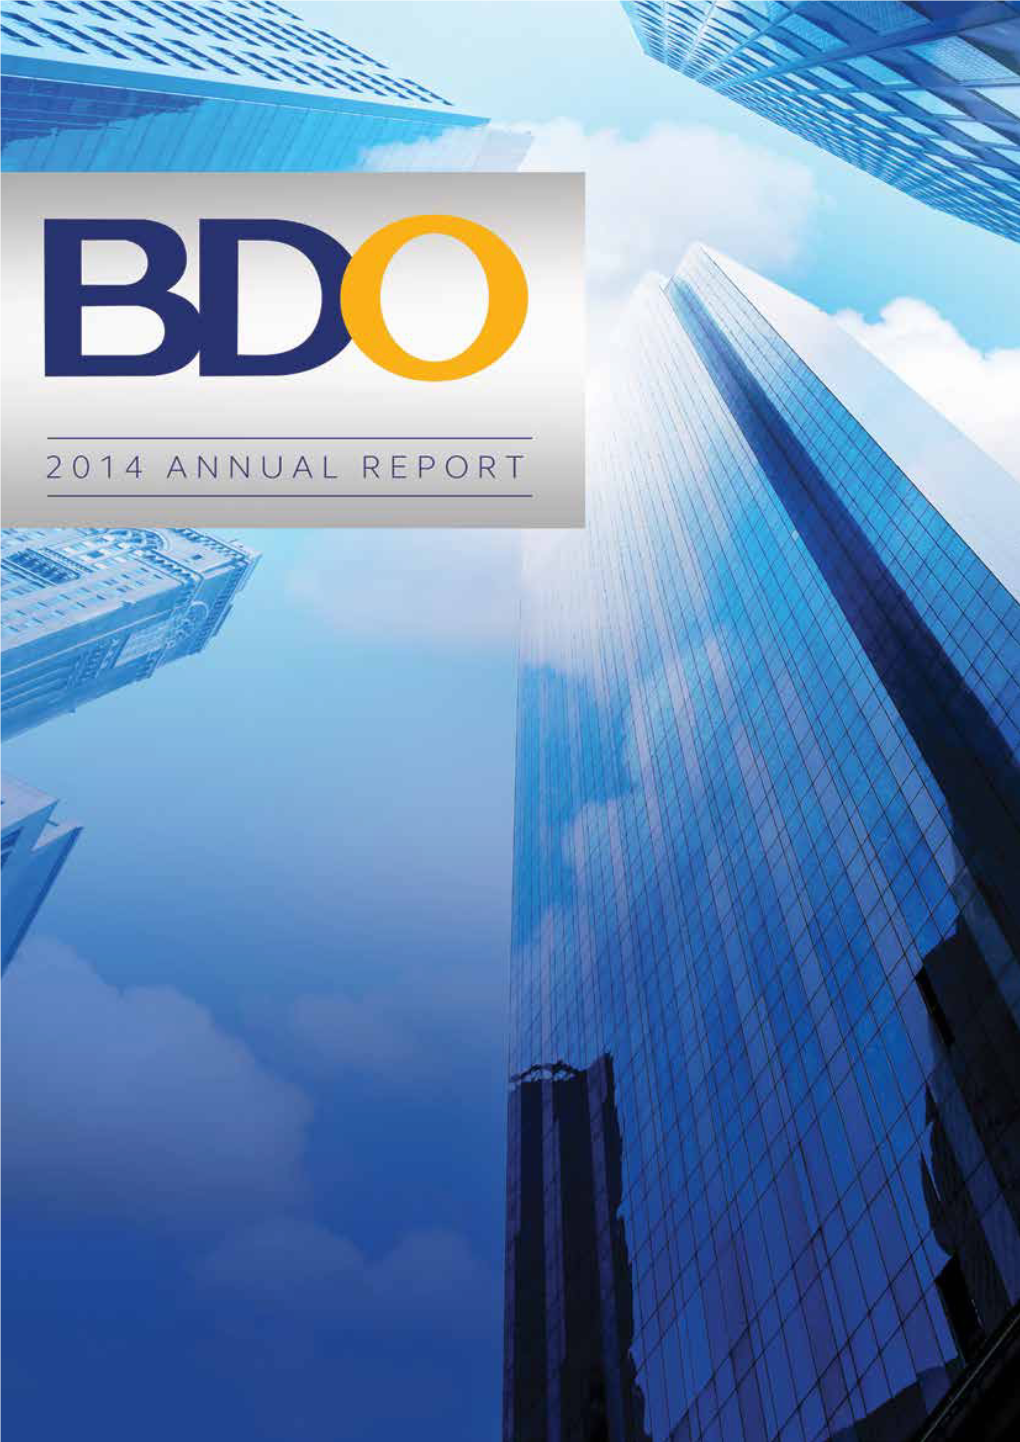 Bdo Group of Companies Subsidiaries and Affiliates